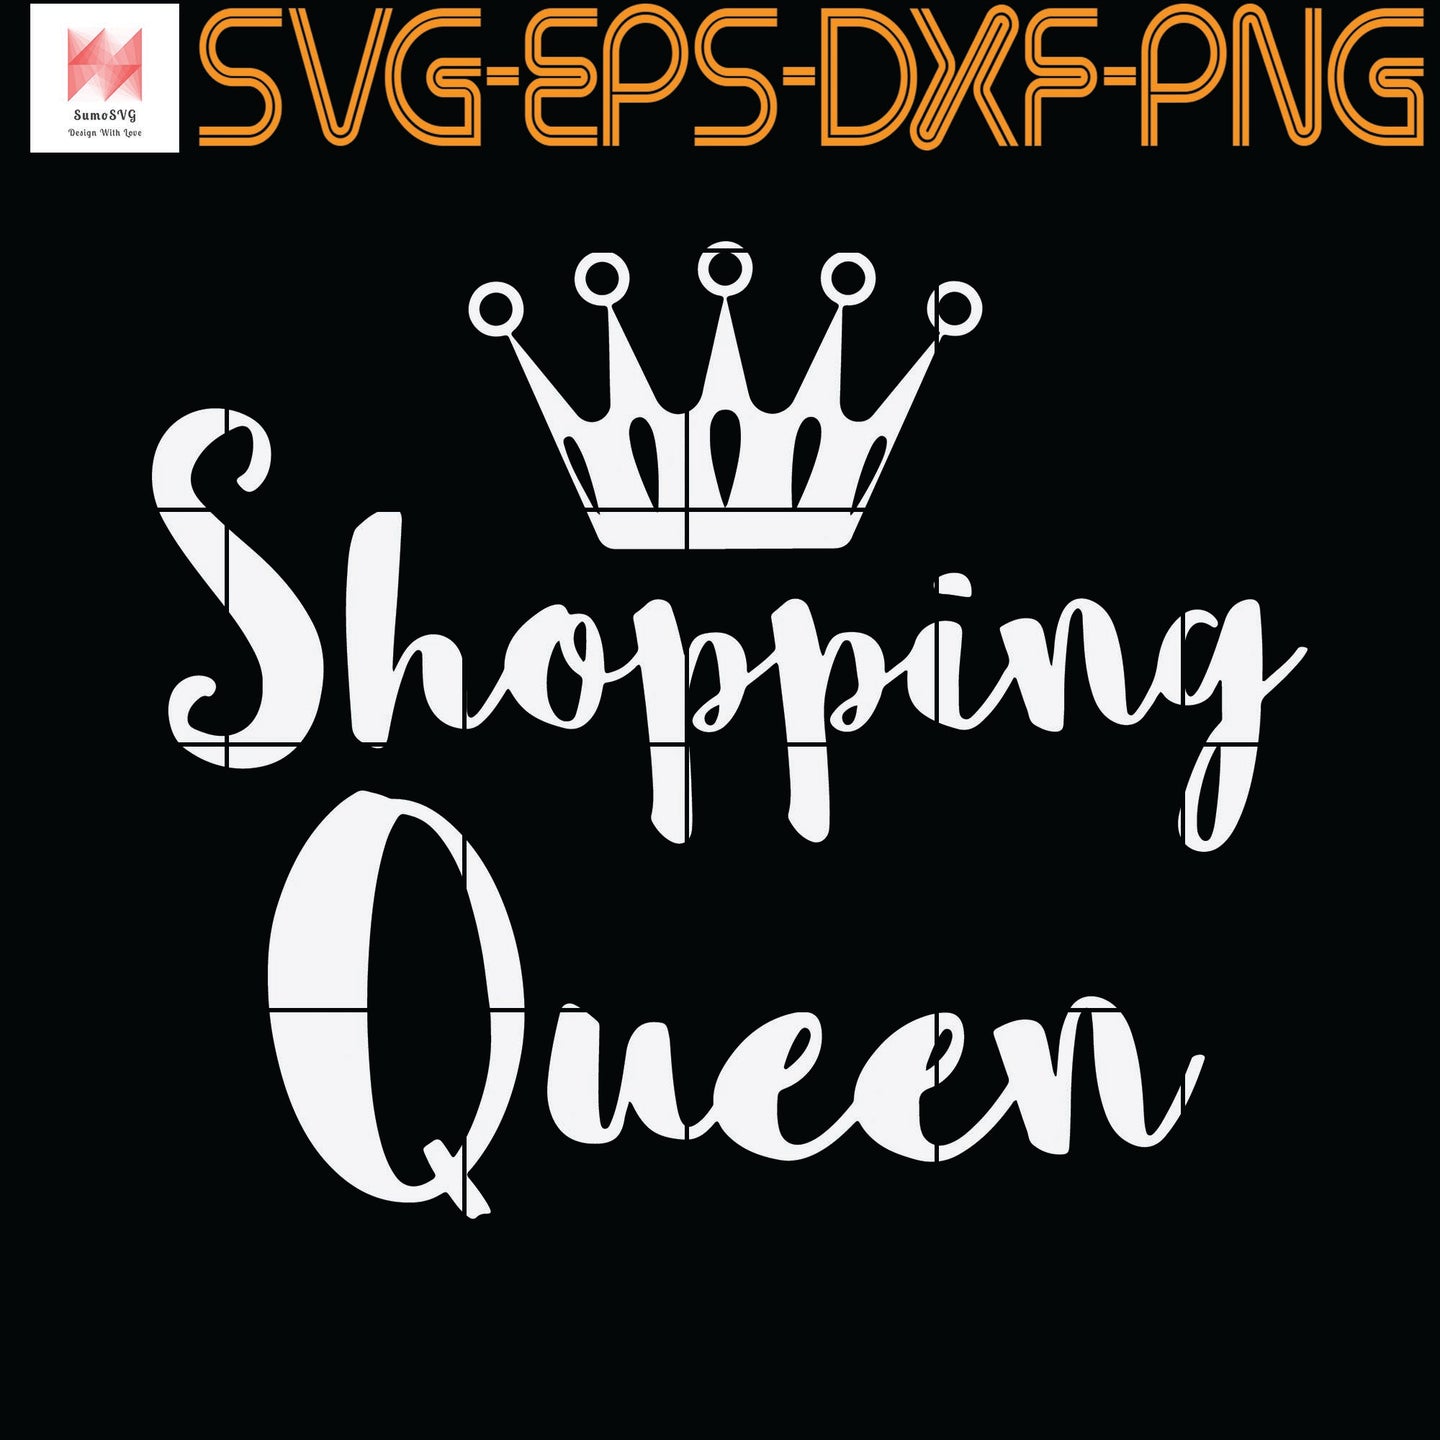 Download Women S Shopping Queen Shopping Shopping Queen Quotes Funny Quotes Sumosvg